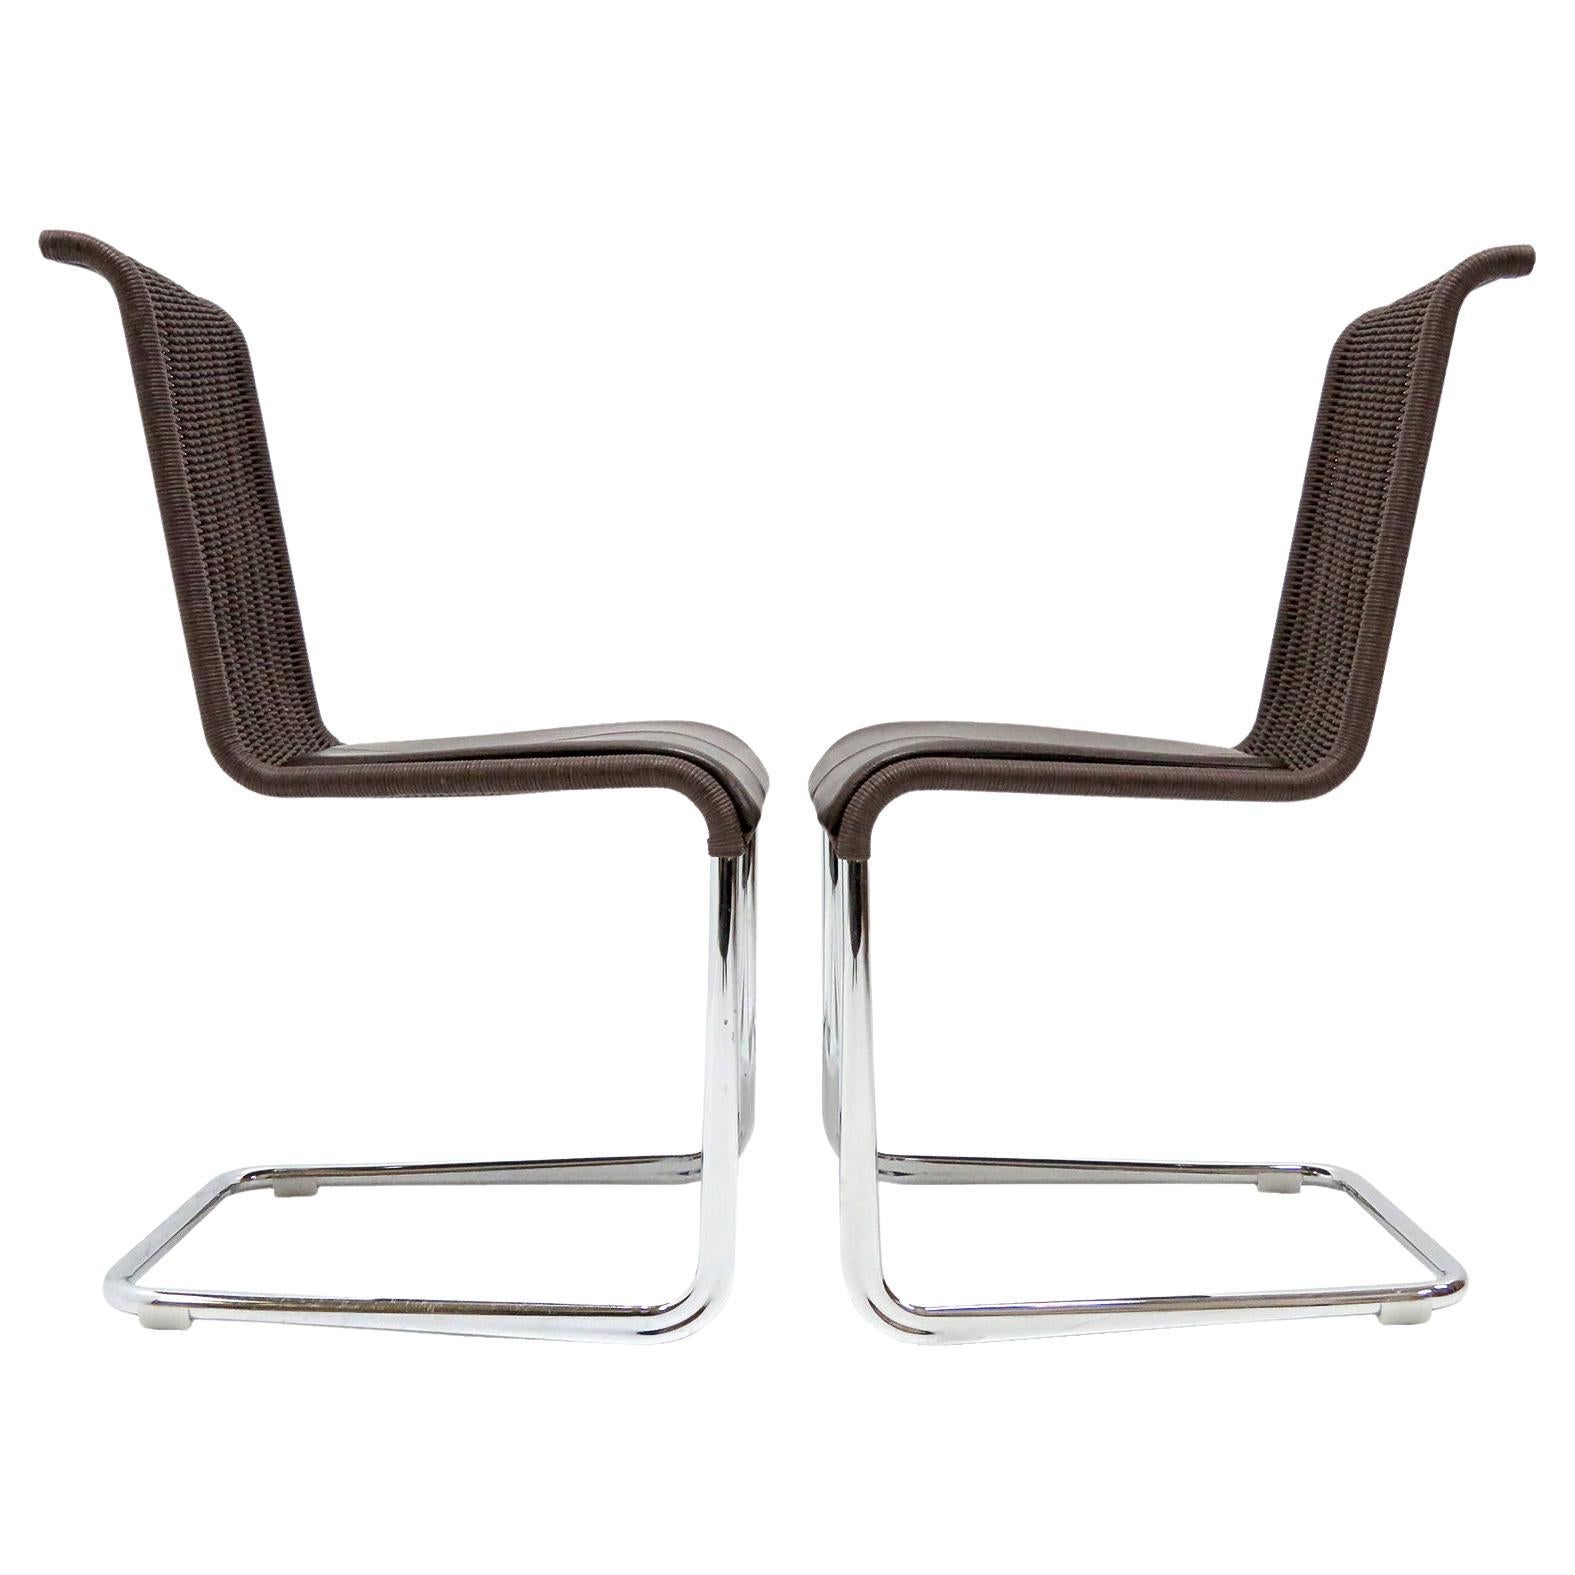 Axel Brüchhauser for Tecta B45 High Back Chairs, 1981 For Sale